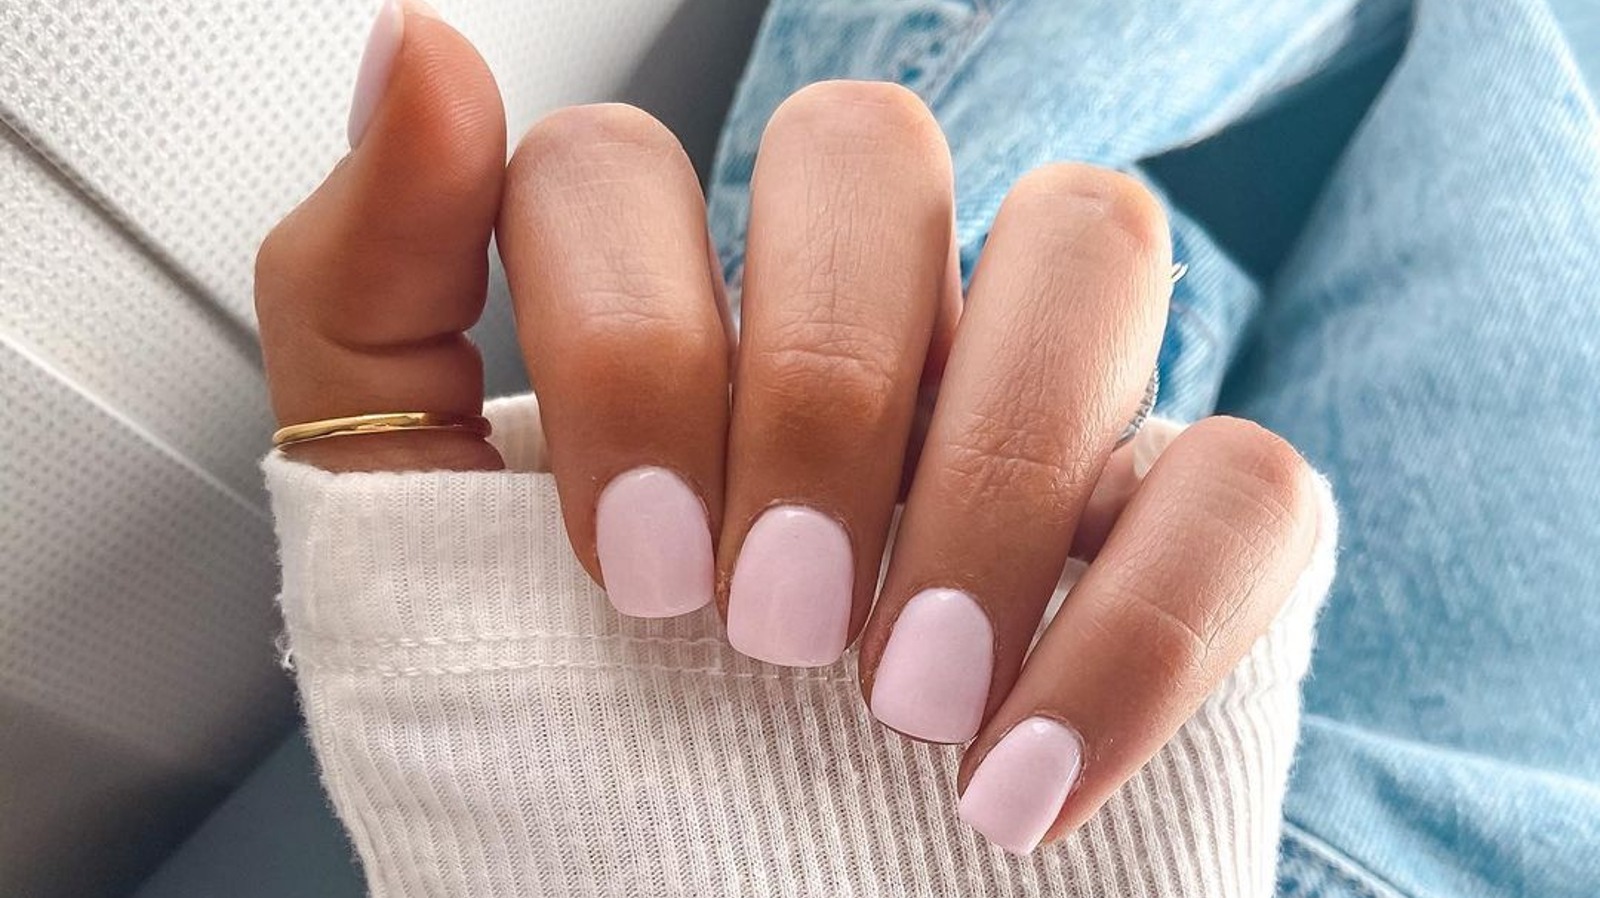 How to Remove Dip Nails: Visiting a Salon May Be Best